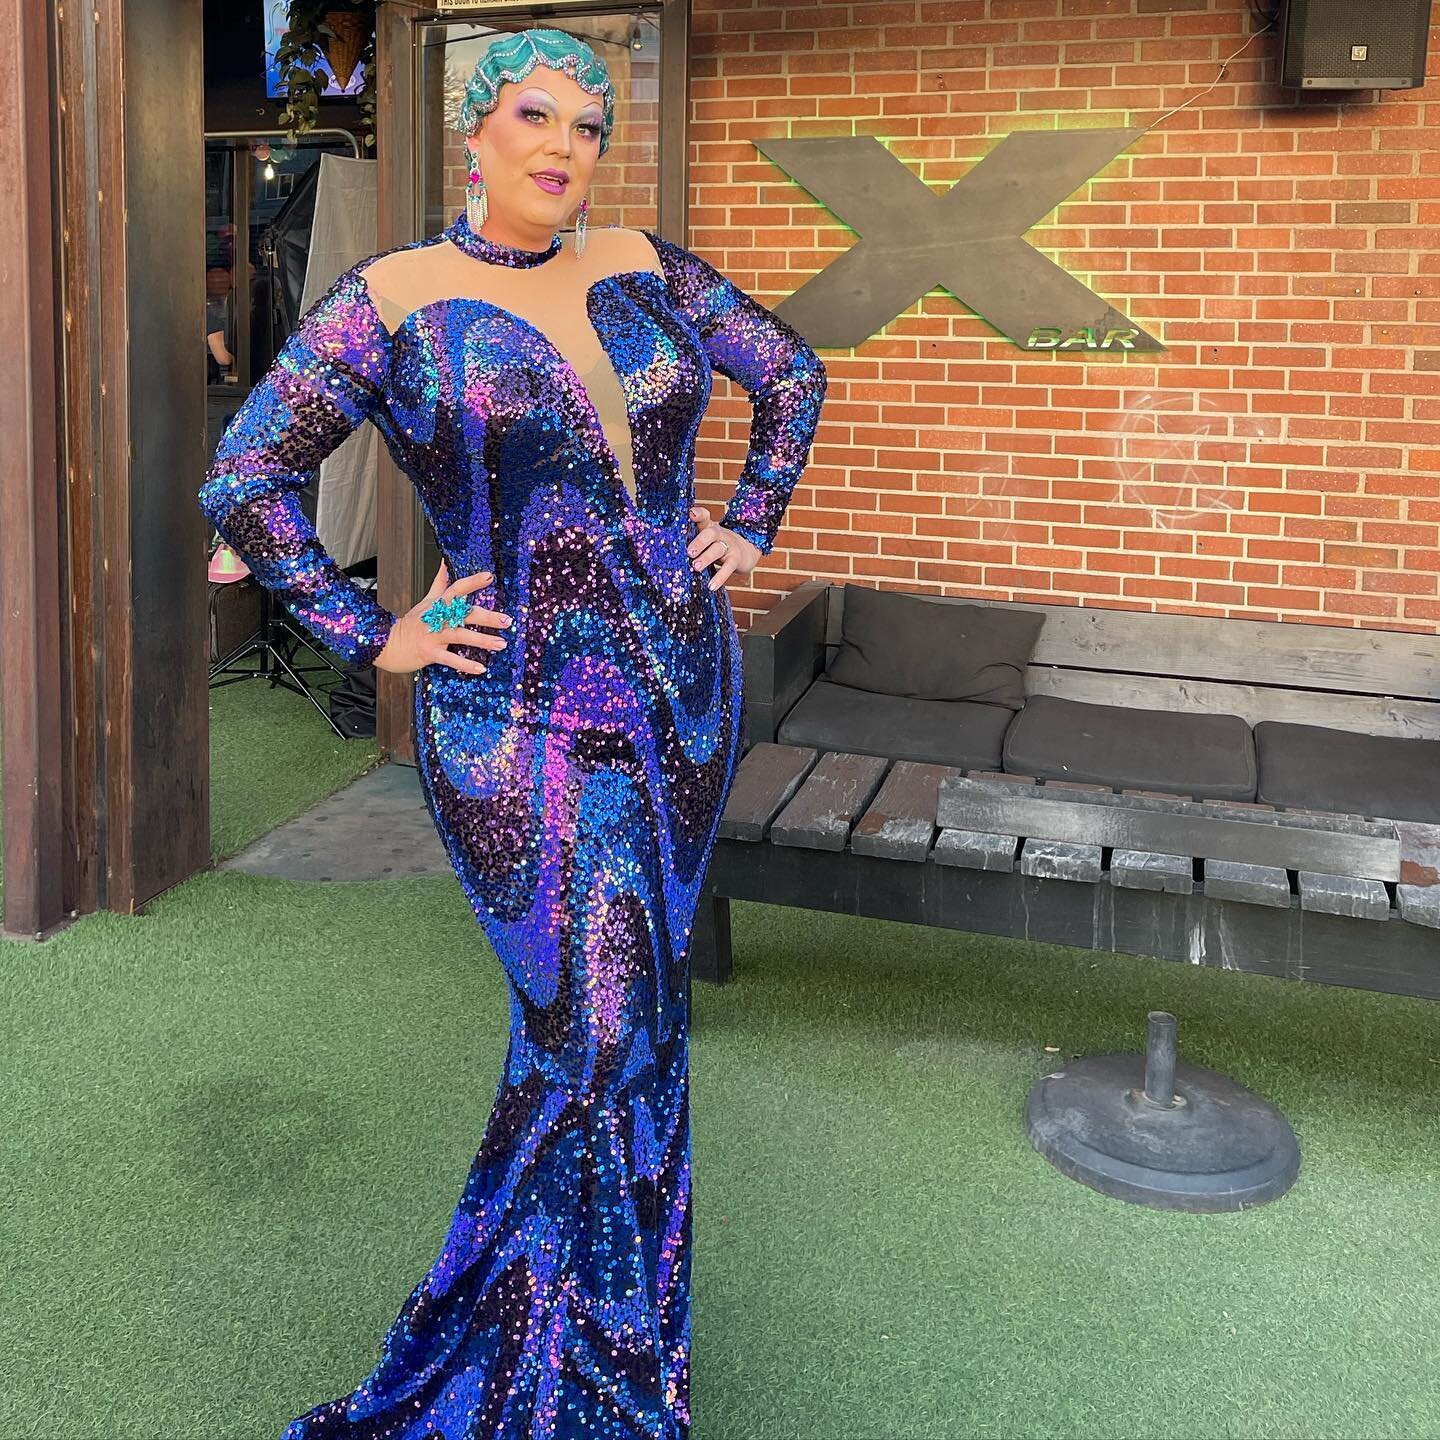 In a world full of trends. I want to remain a classic. 👗 @ilovehollyday 
#dragqueen #coloradodivasawards #dragexcellence #denverdrag #drama #dragqueensofinstagram #dragrace #draglook #instagay #gay #gayfitness #instagood #redcarpet #xbar #denver #ga